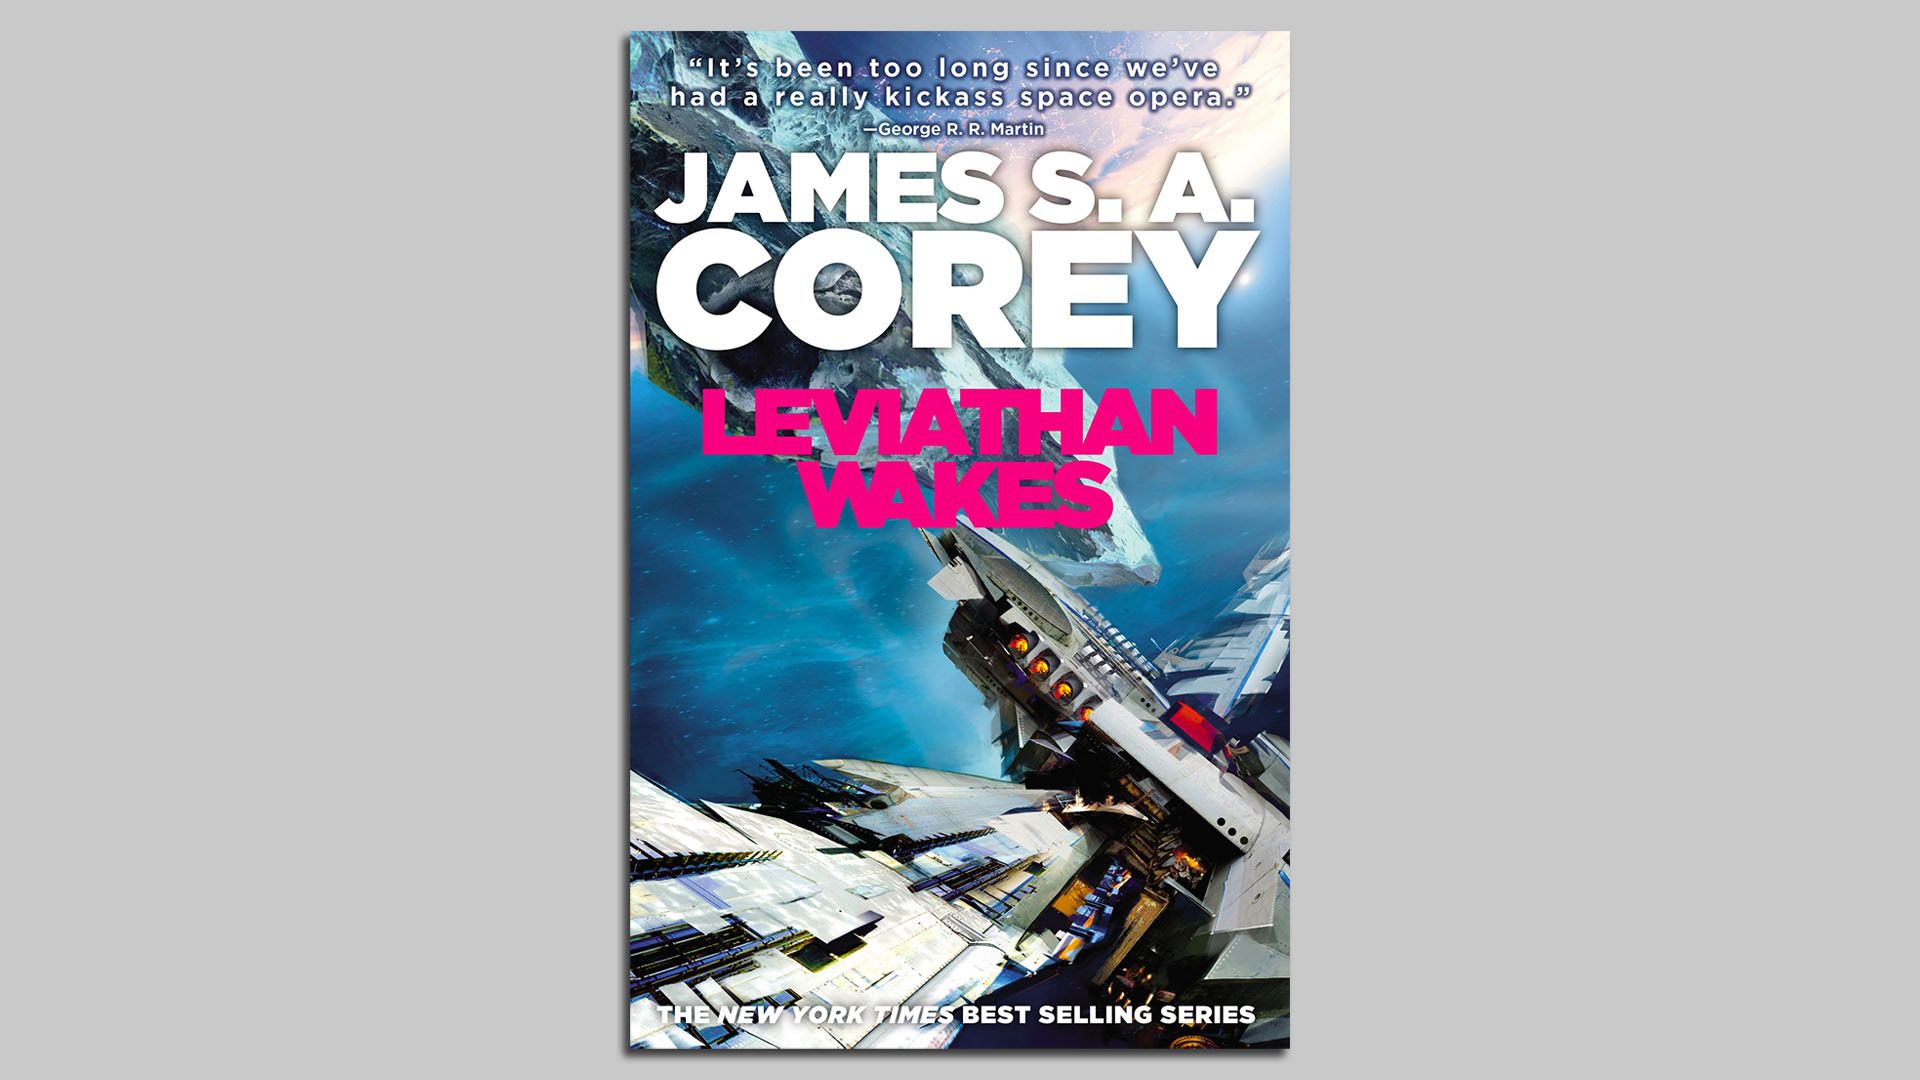 Book cover of "Leviathan Wakes"